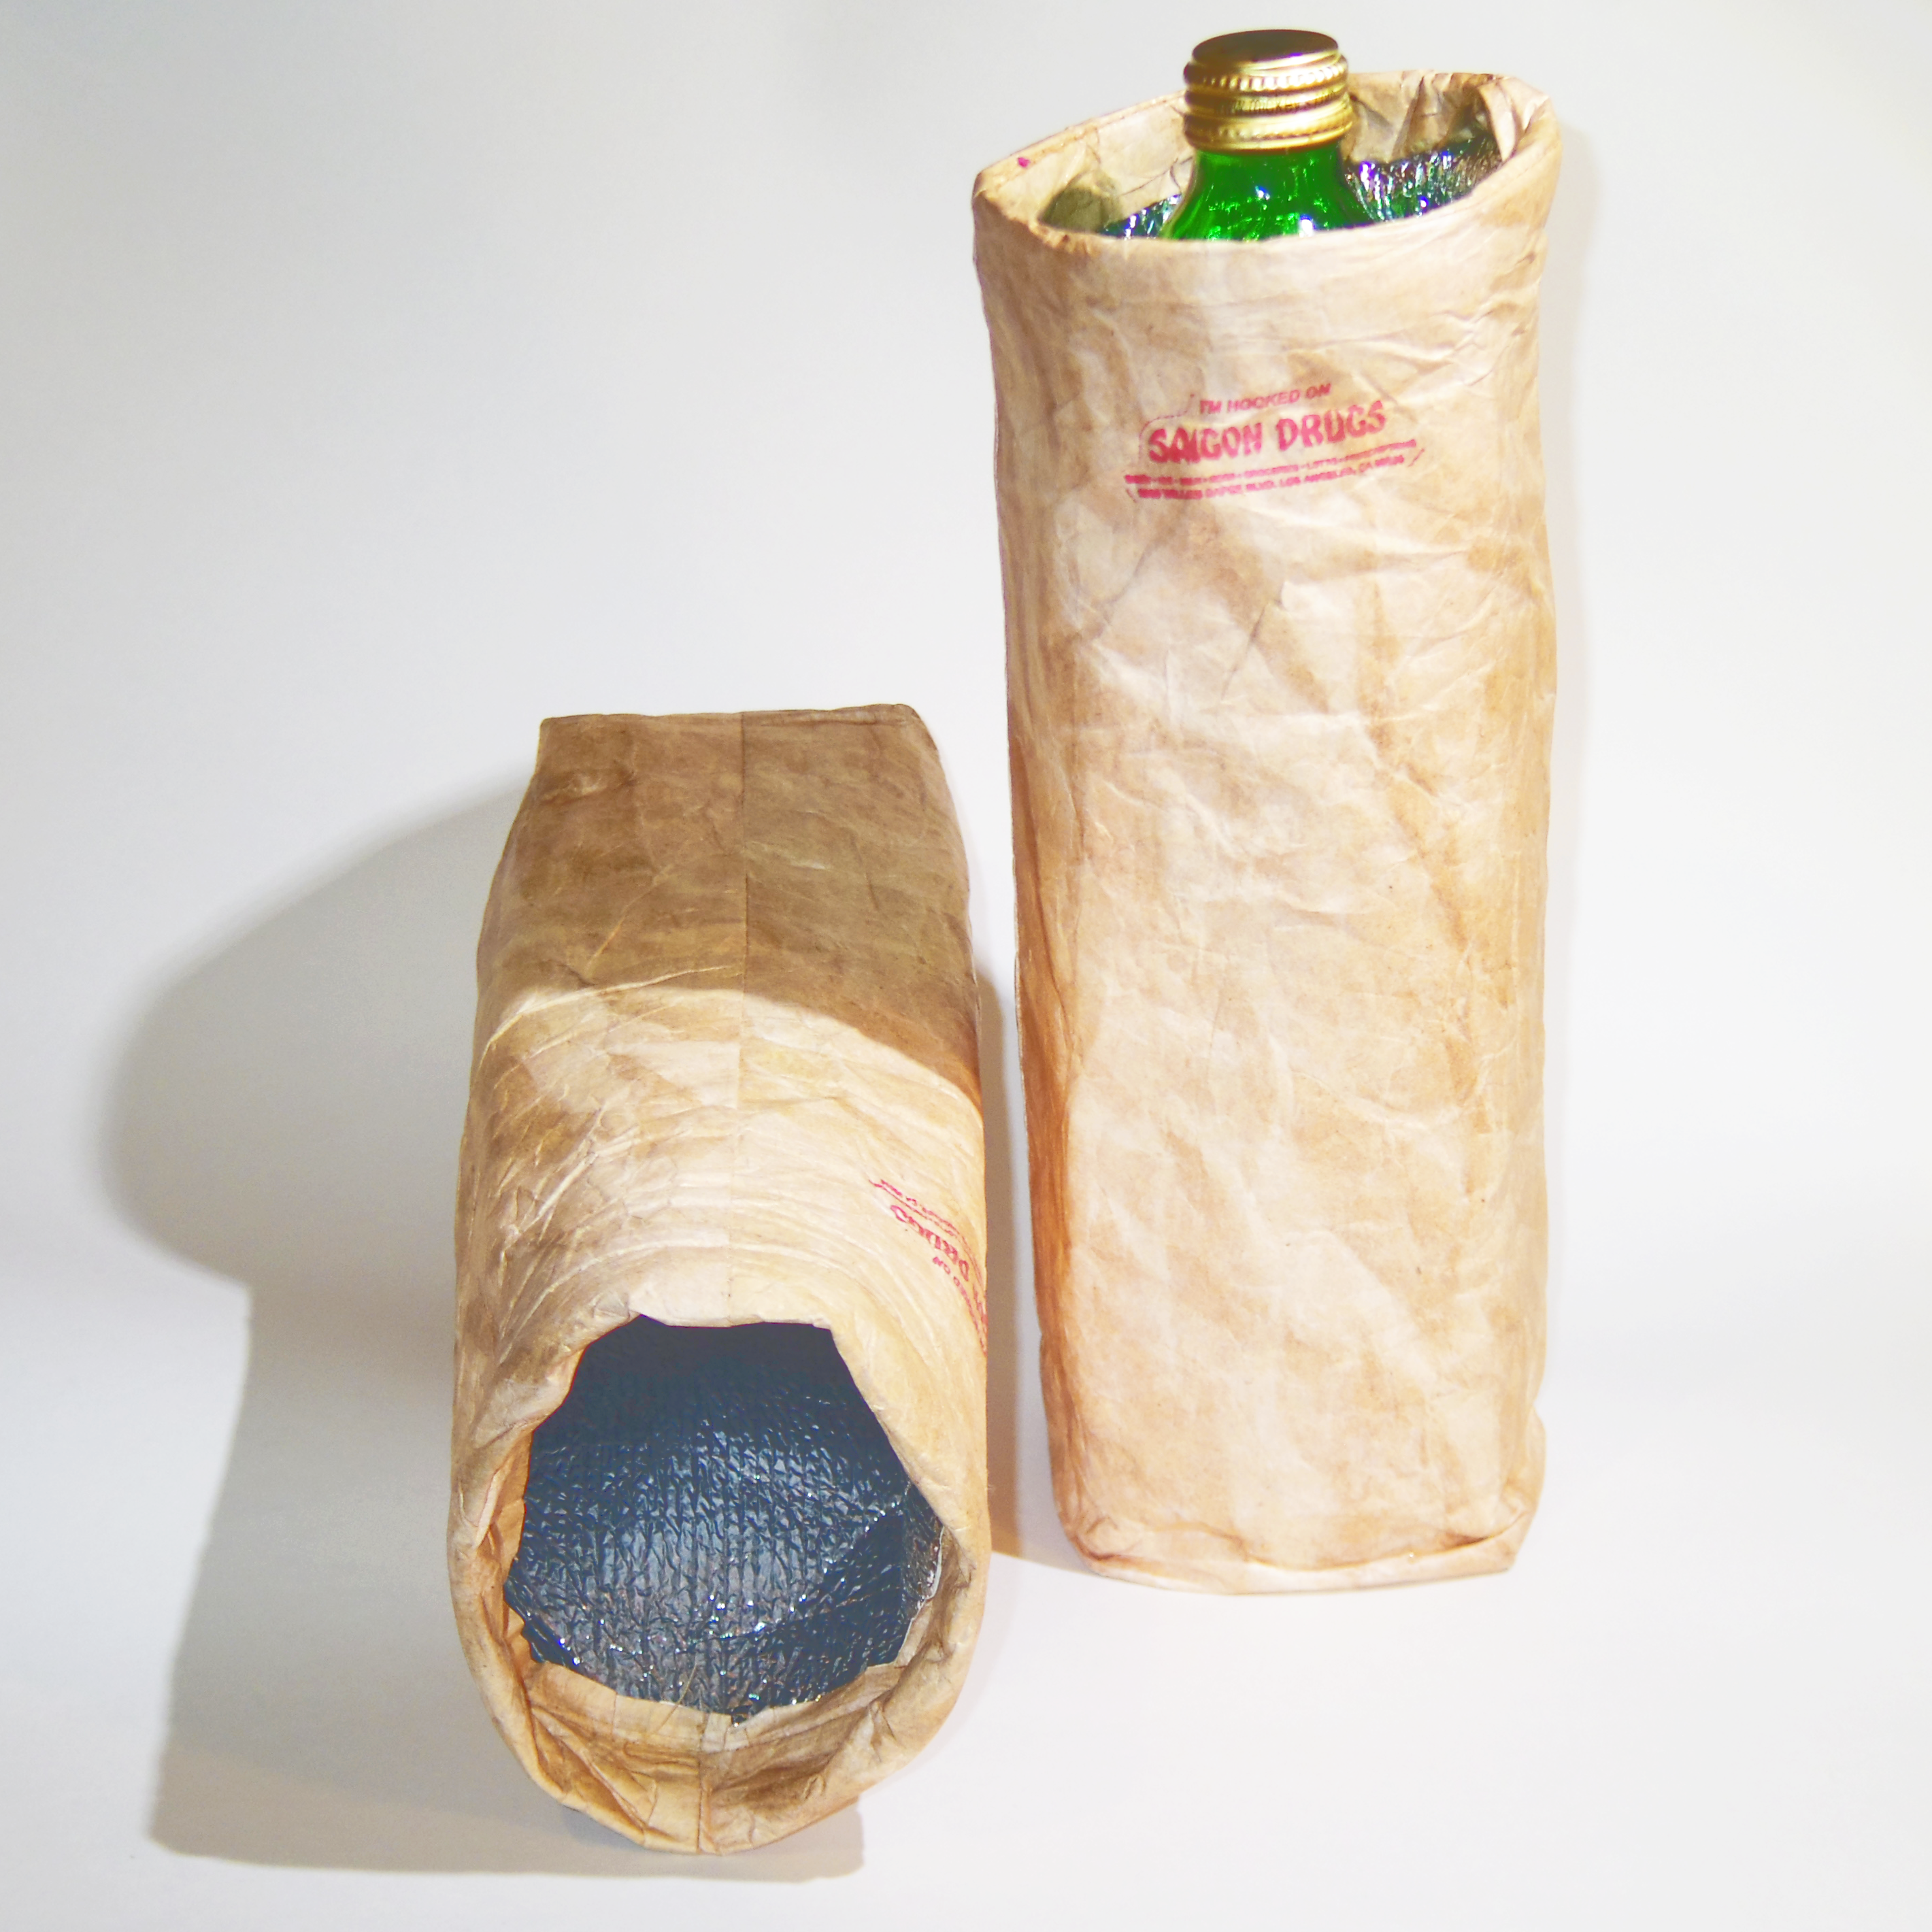 Insulated and reusable 40 oz/wine bottle koozie